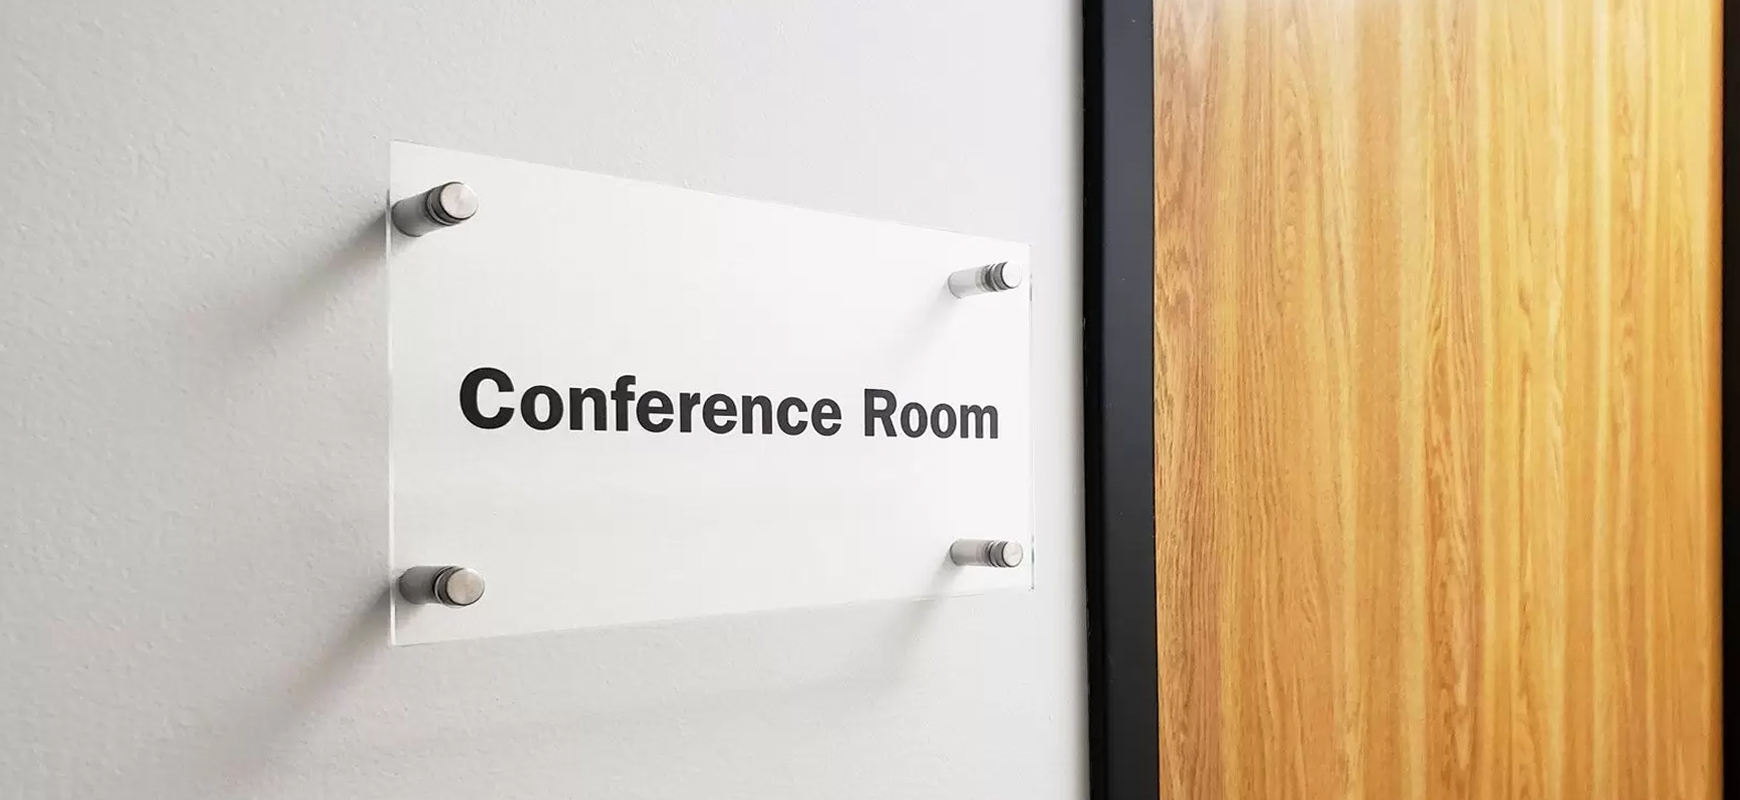 Acrylic conference nameplate with standoffs for meeting rooms